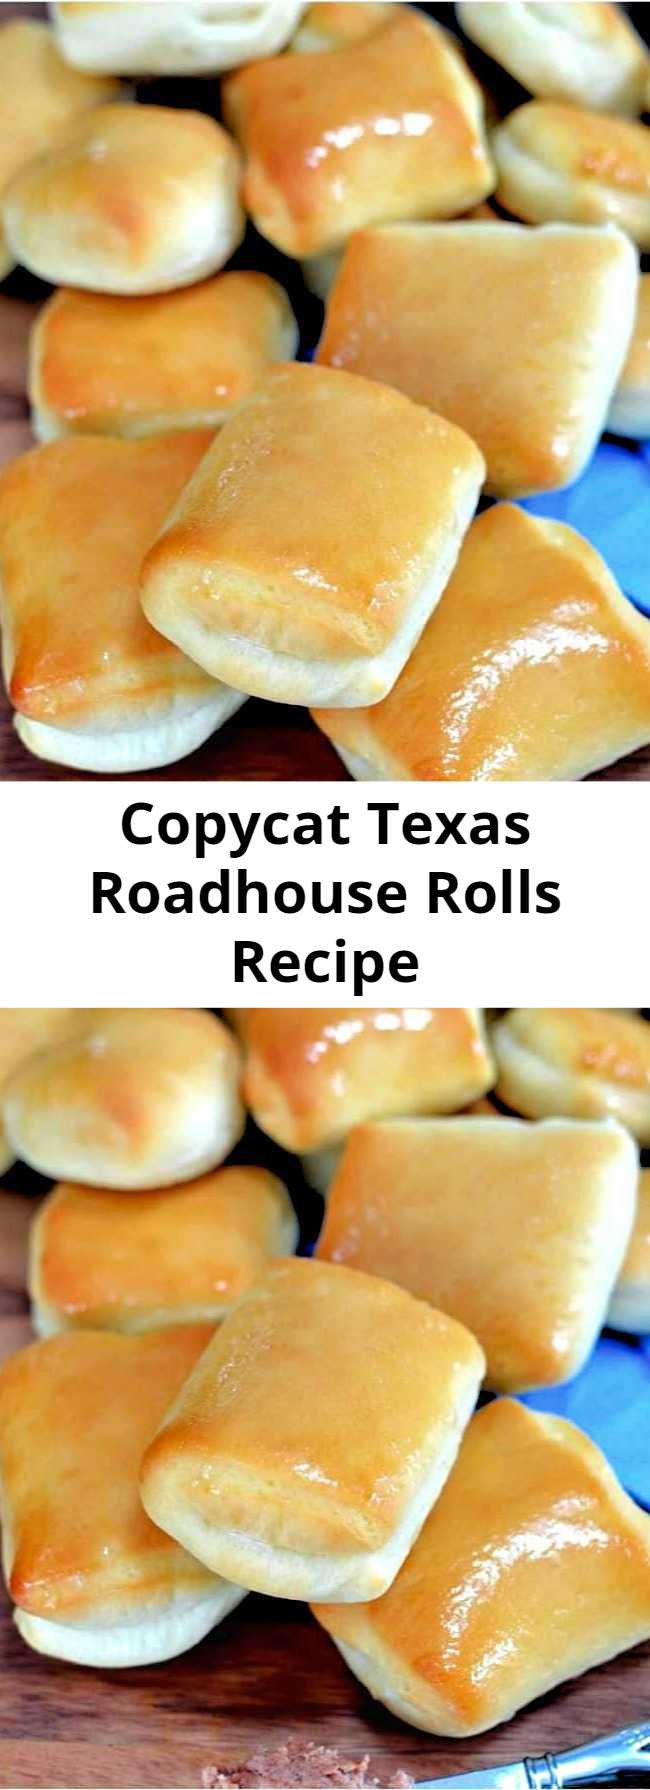 Copycat Texas Roadhouse Rolls Recipe - These Copycat Texas Roadhouse Rolls are brushed with sweet honey butter and can be made in a bread machine or by hand! A perfect side dish idea for holidays and family dinners! #rolls #easy #texasroadhouse #bread #sidedish #sides #copycatrecipes #copycatrecipe